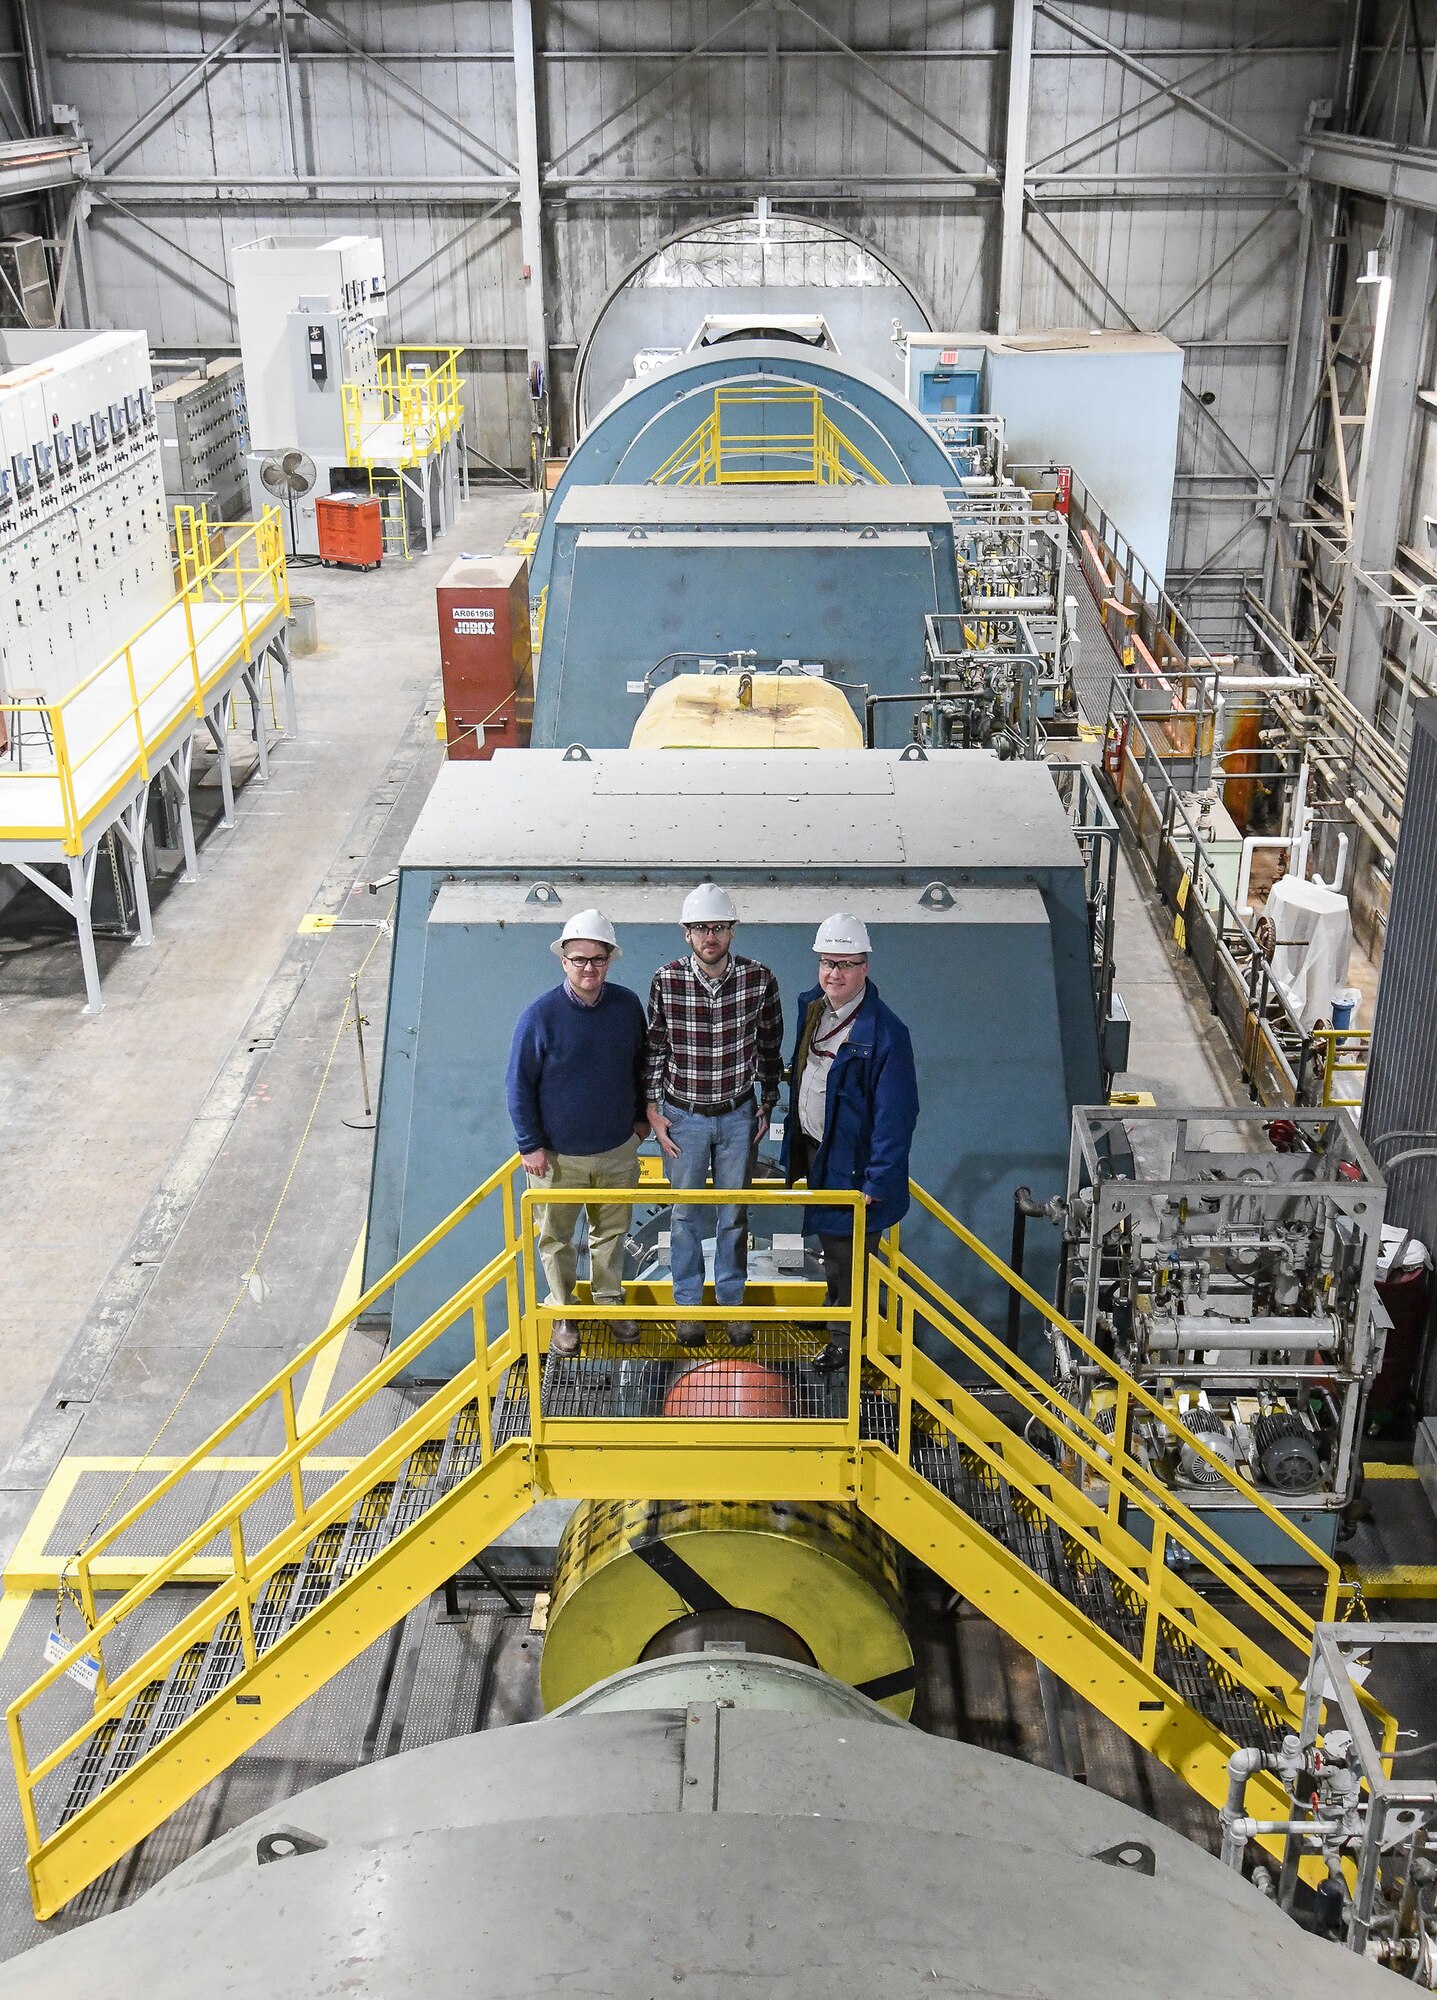 Shelby Moorman, left, an electrical systems engineer, Ethan Jobe, a plant operations engineer, and Tyler McCamey, a program manager, pose for a photo in the Main Drive building of the Arnold Engineering Development Complex (AEDC) Propulsion Wind Tunnel (PWT) Facility Feb. 7, 2020, at Arnold Air Force Base, Tenn. AEDC team members determined a new configuration of the motors to power the compressors, resulting in a significant power savings. (U.S. Air Force photo by Jill Pickett)